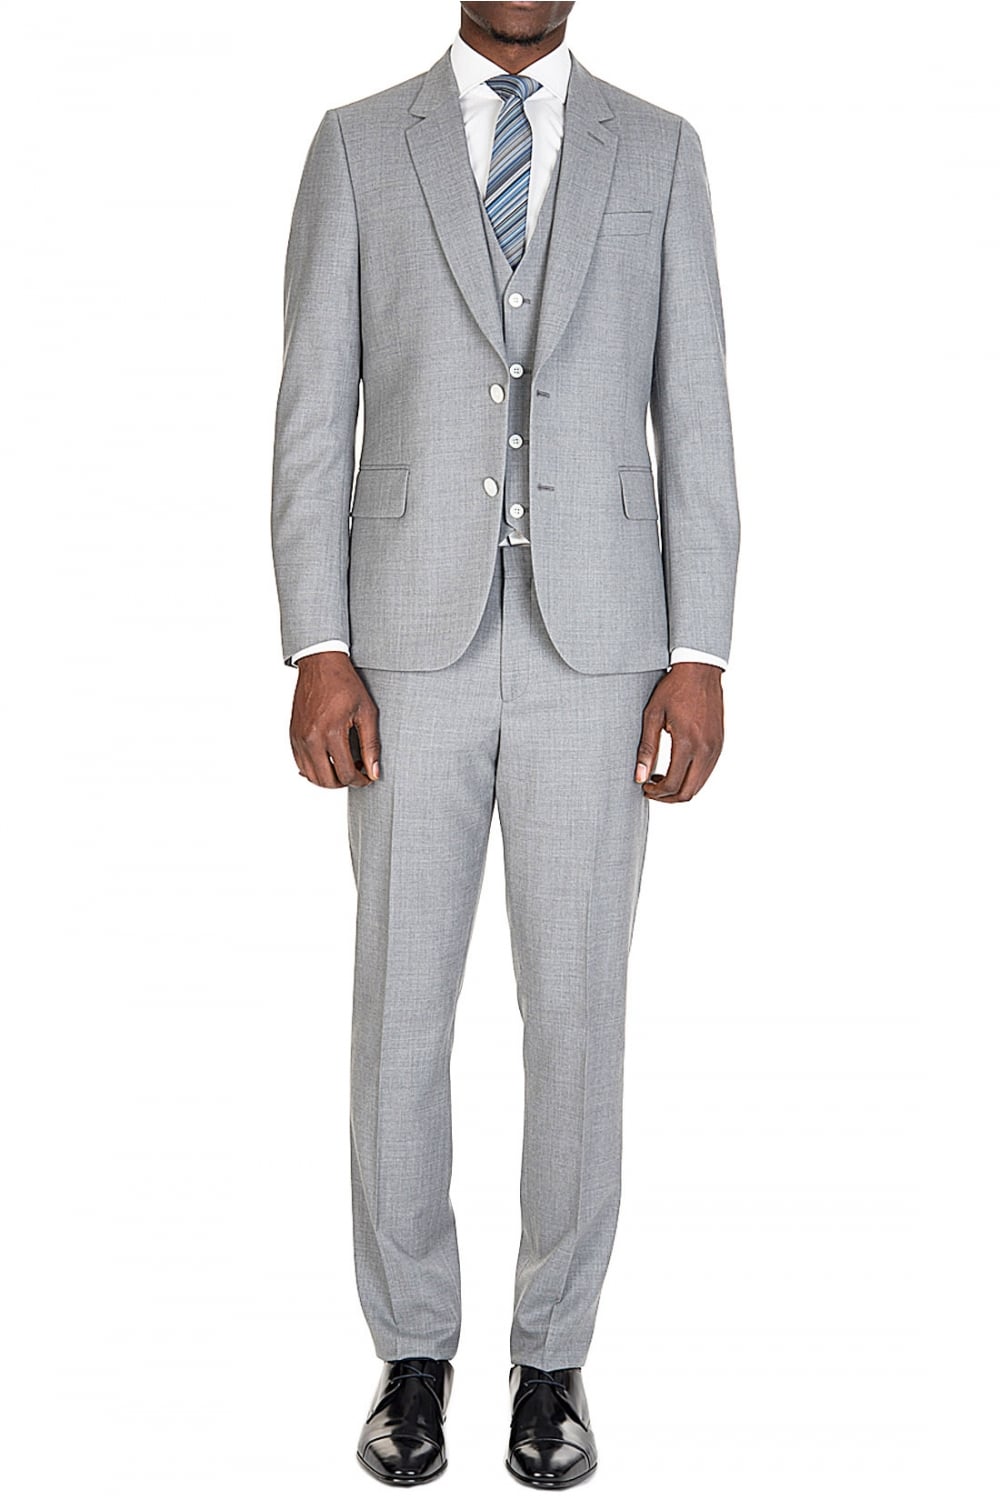 paul smith soho suit review